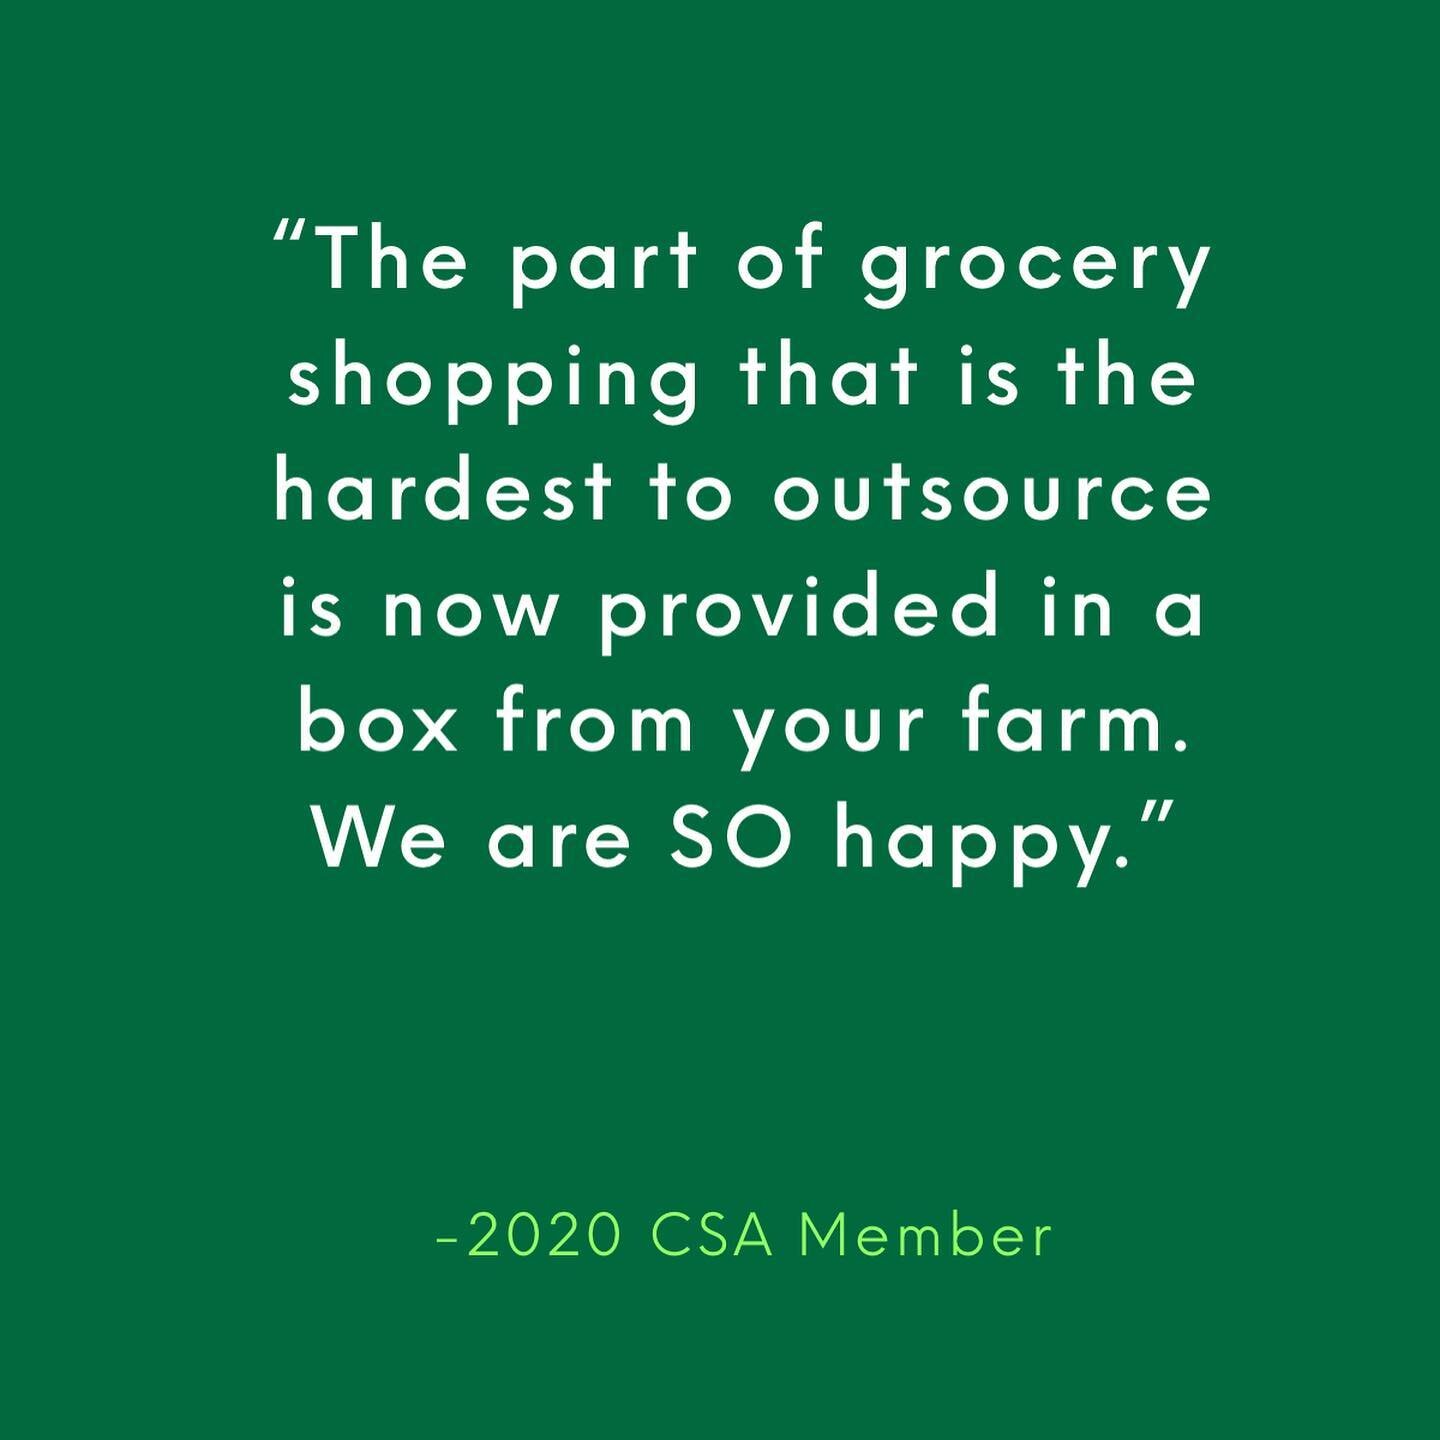 This is the the gist of it!  We will deliver fresh, local, chemical-free, food to you each week for 18 weeks. With the food you eat from our CSA, you can rest assured, you are supporting your local economy, supporting local food systems, and sustaina